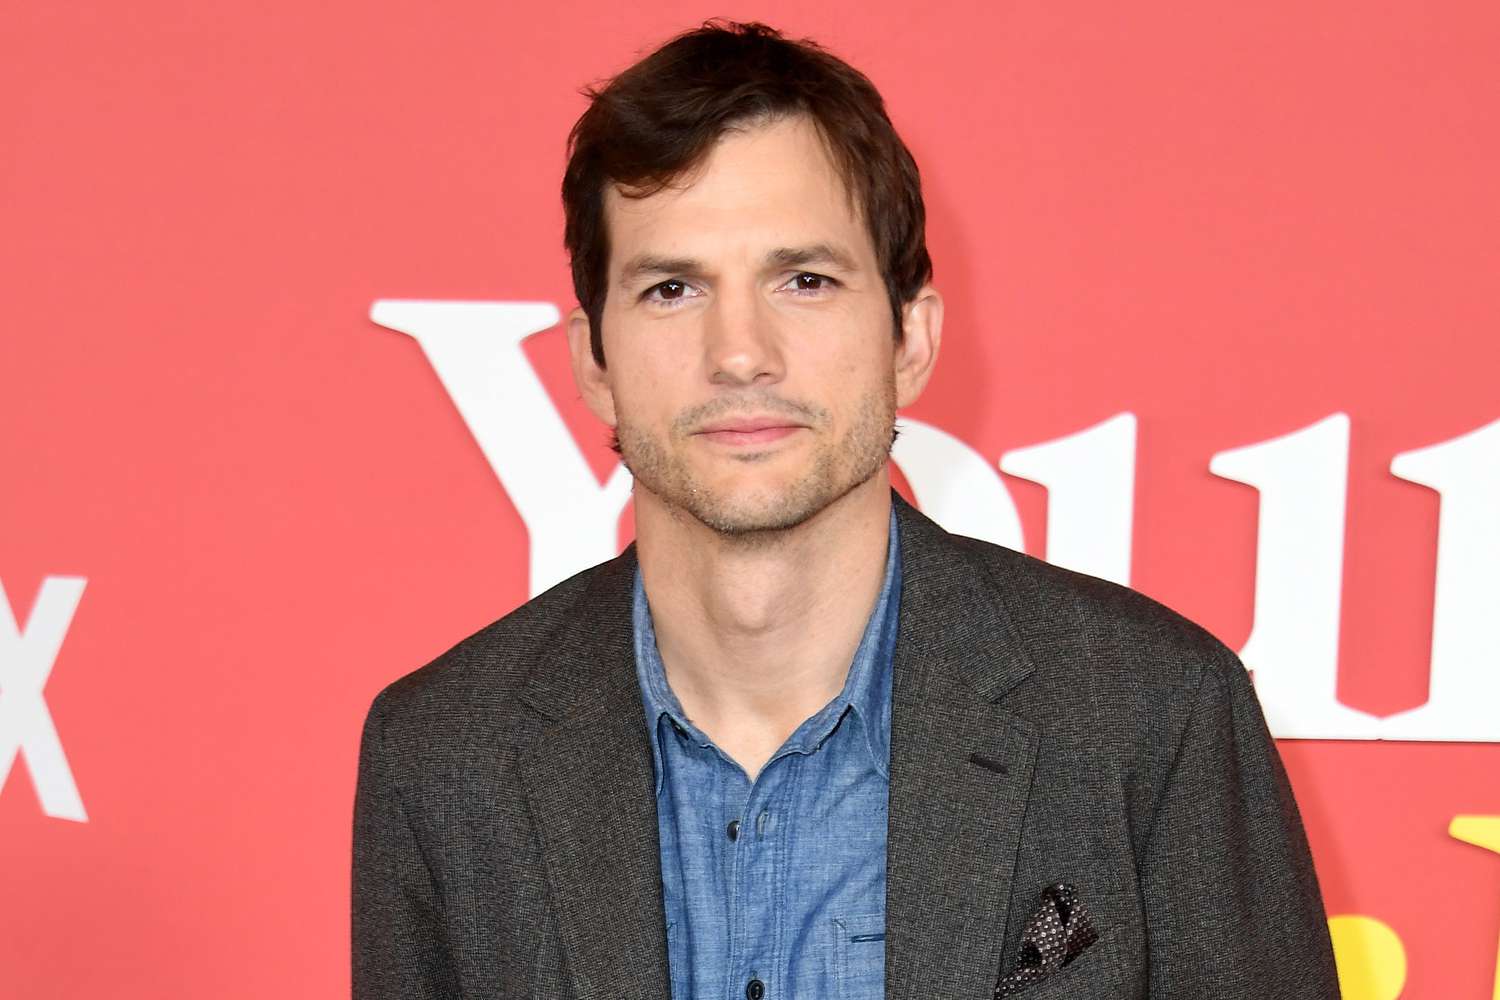 Ashton Kutcher Sparks Debate: Can AI Replace Hollywood's Actors and Studios?